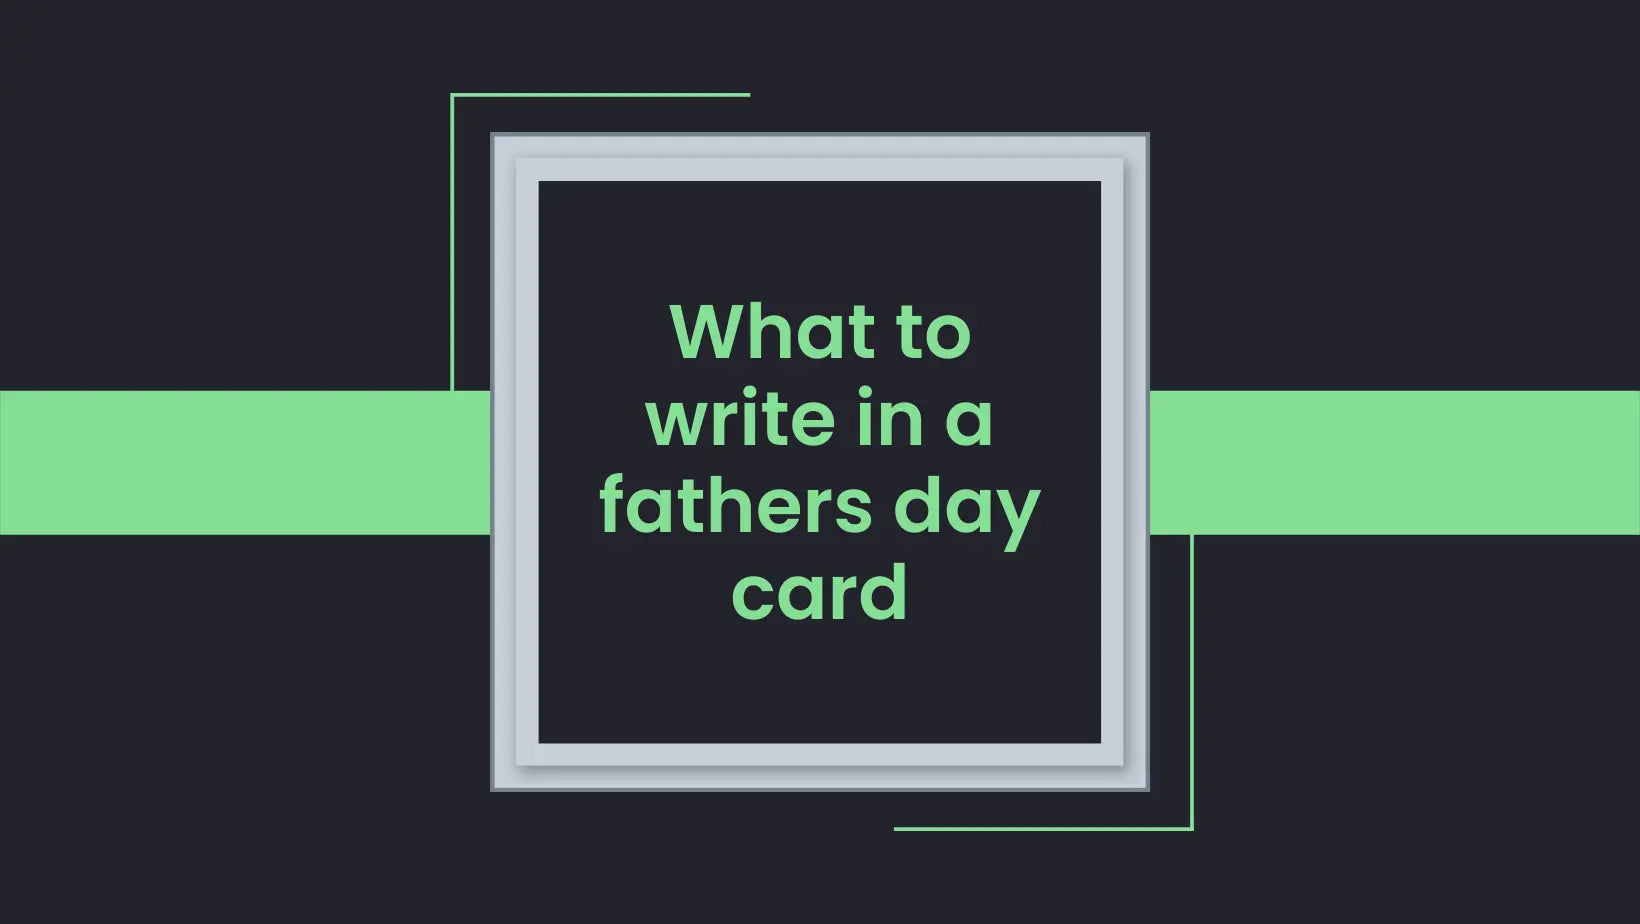 10+ fathers day messages to write in fathers day card